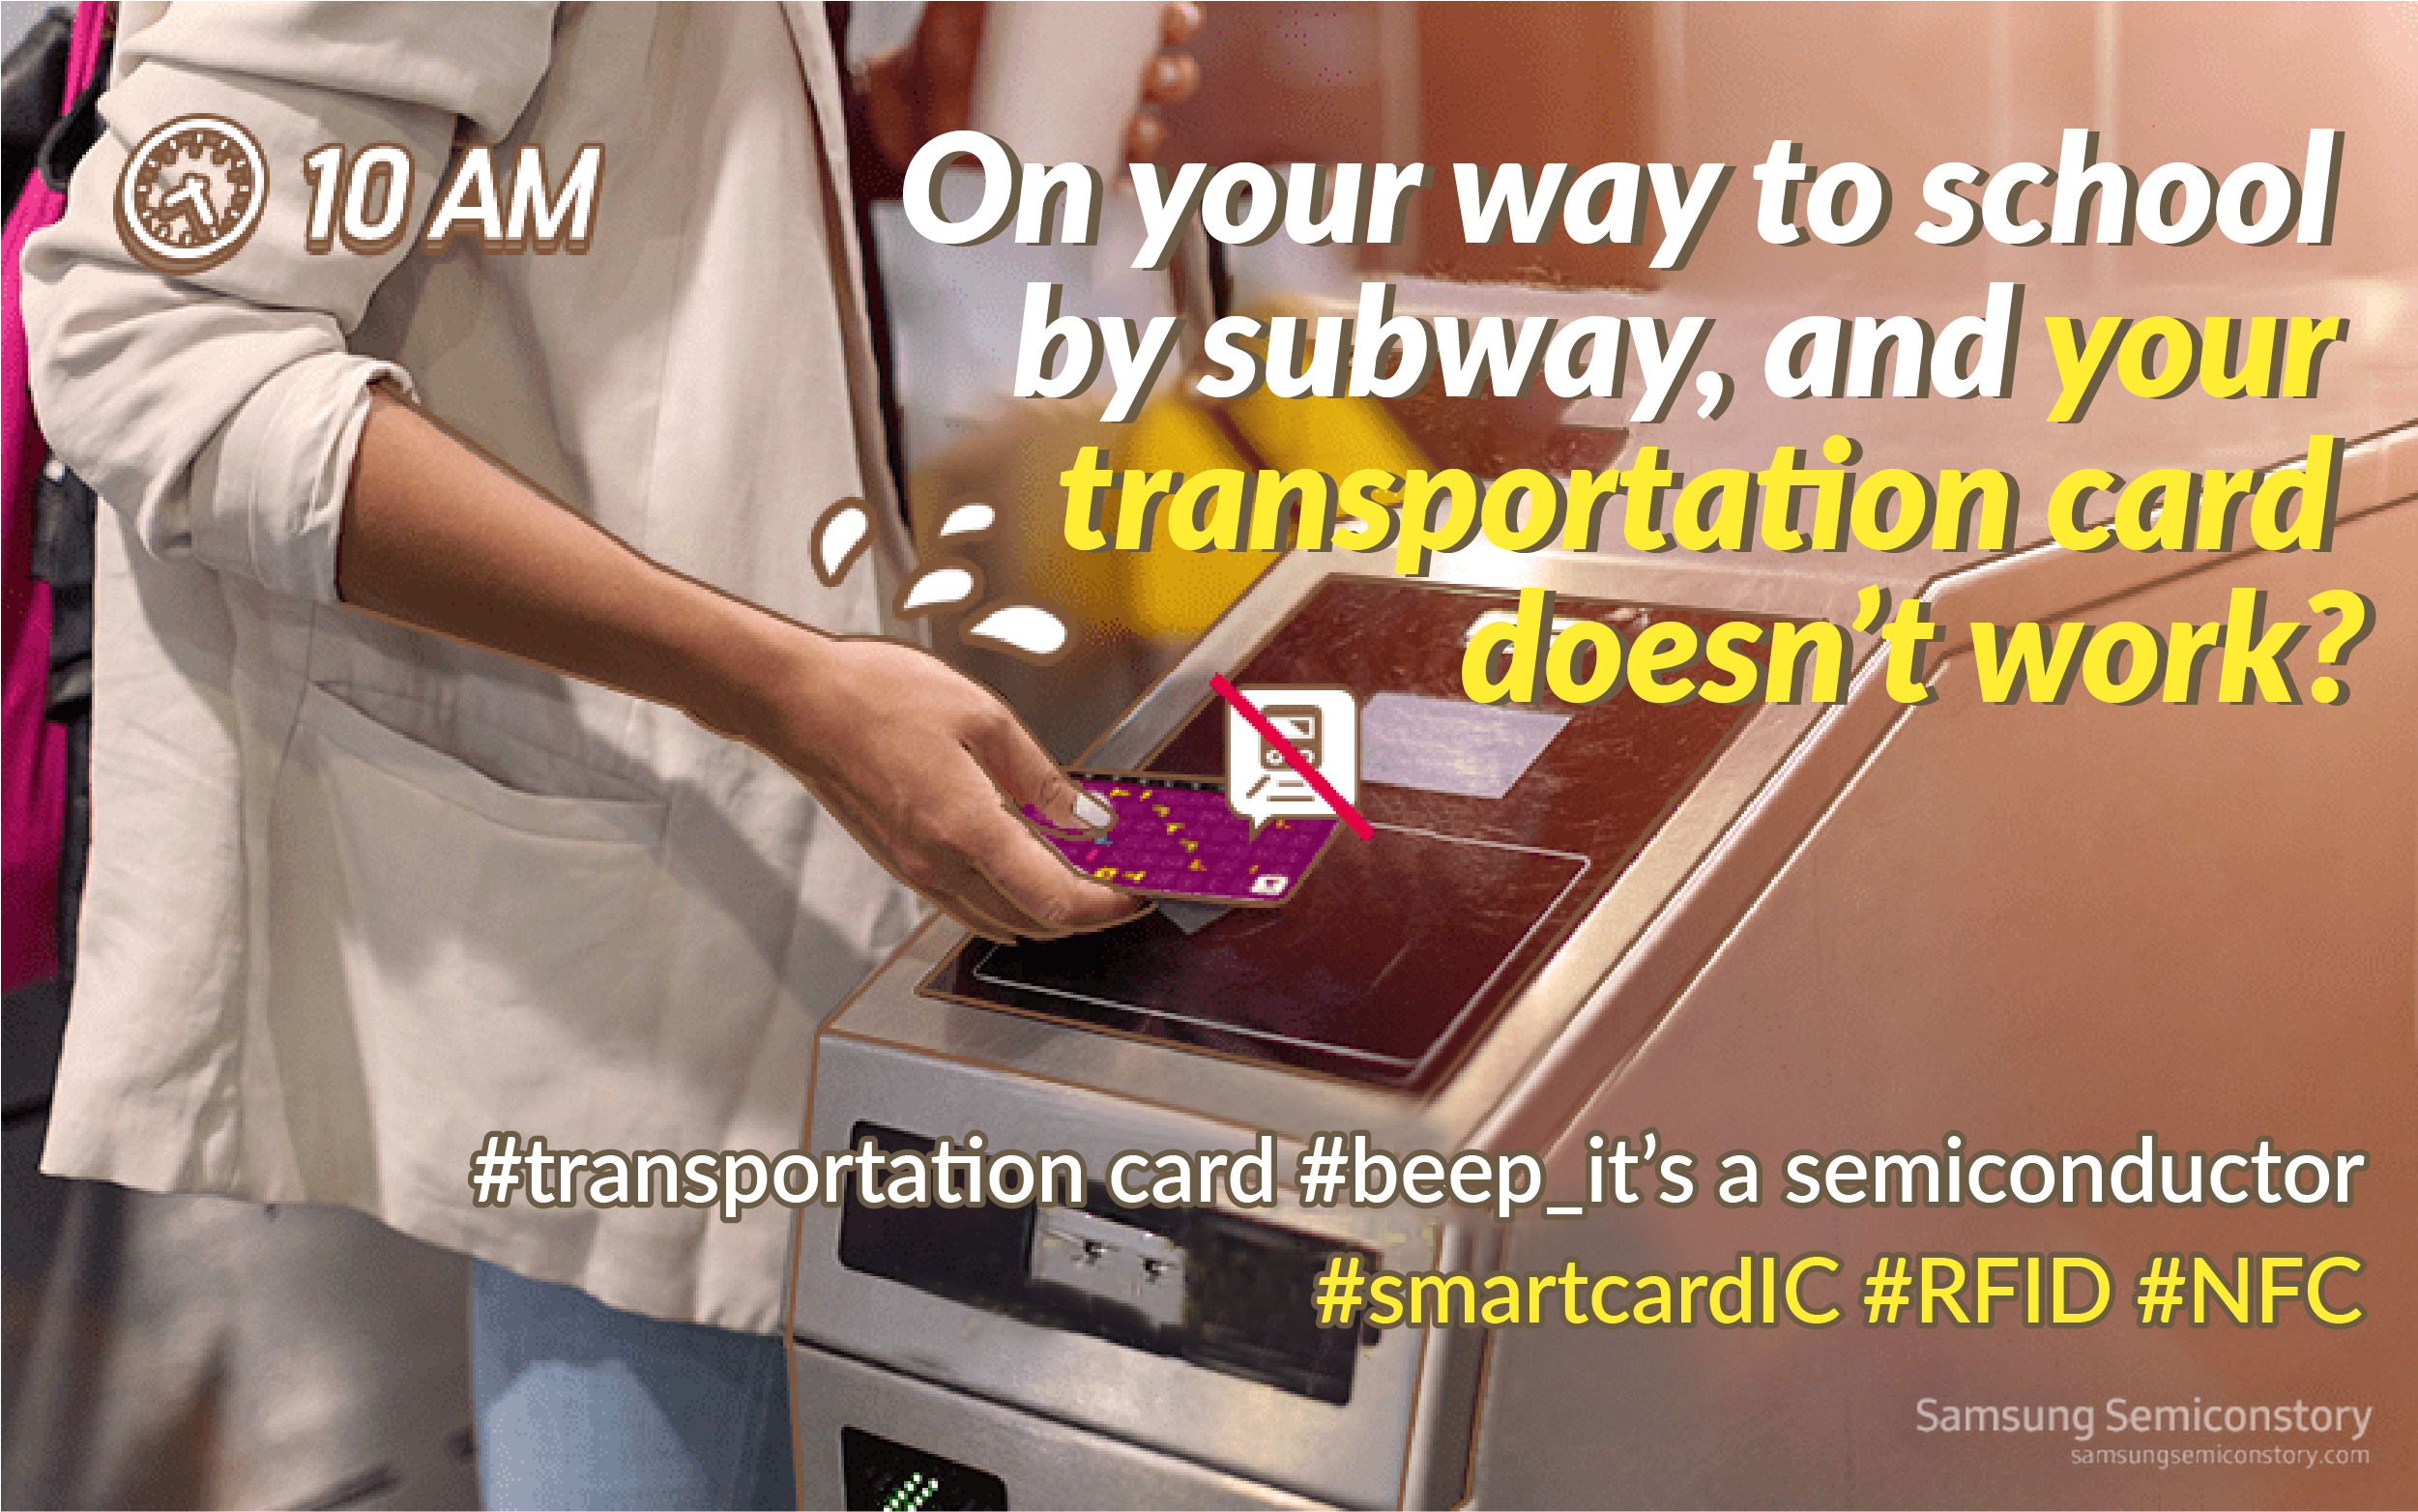 At 10am, On your way to school by subway, transportation doesn't work because of no IC card.